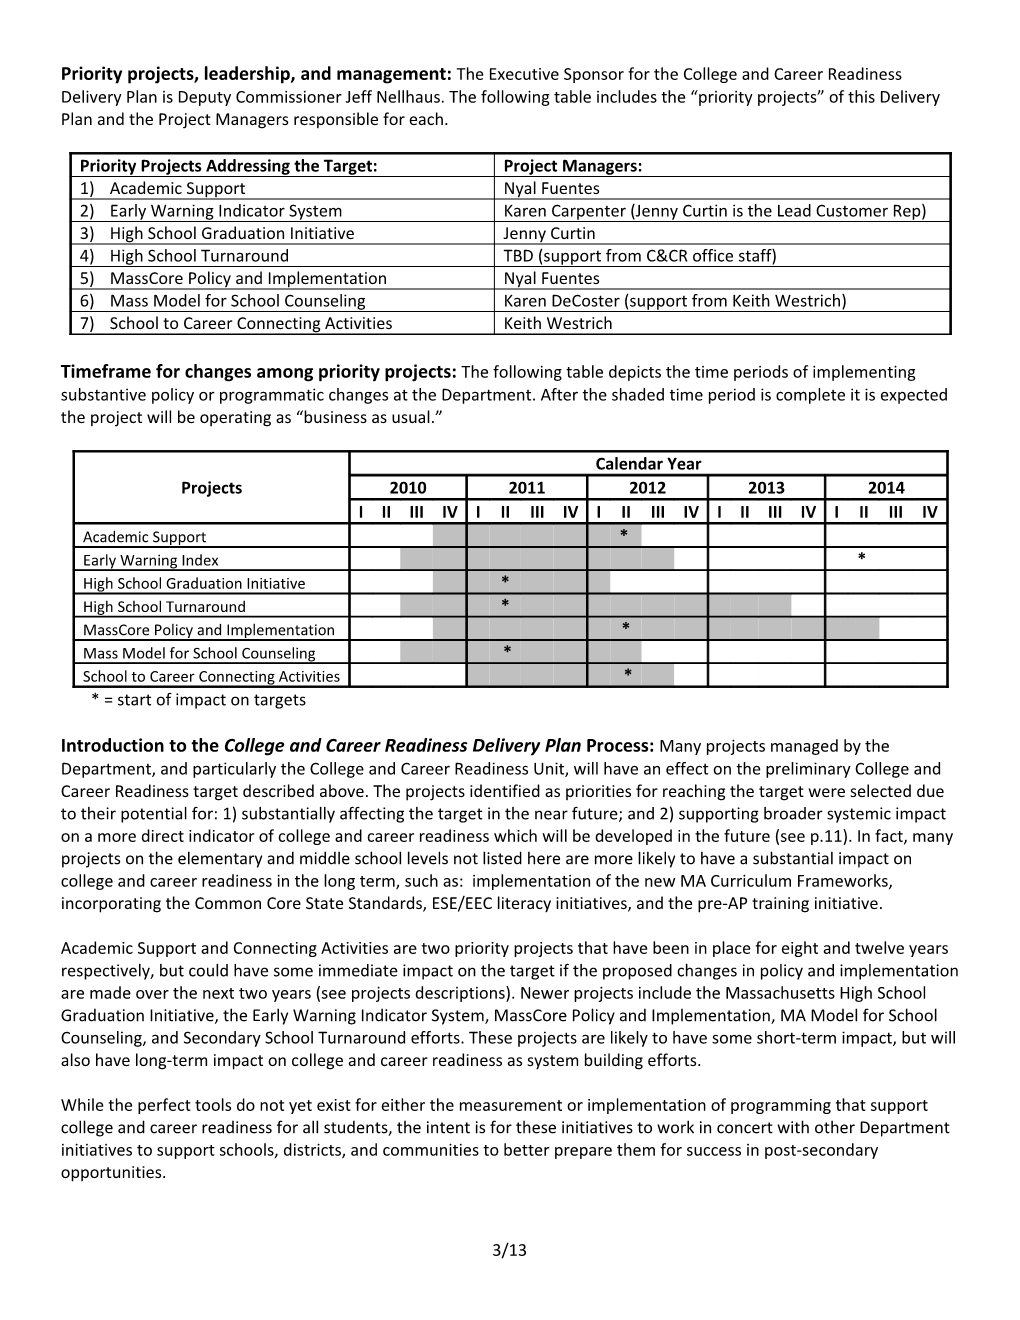 College and Career Readiness Delivery Plan, March 2011